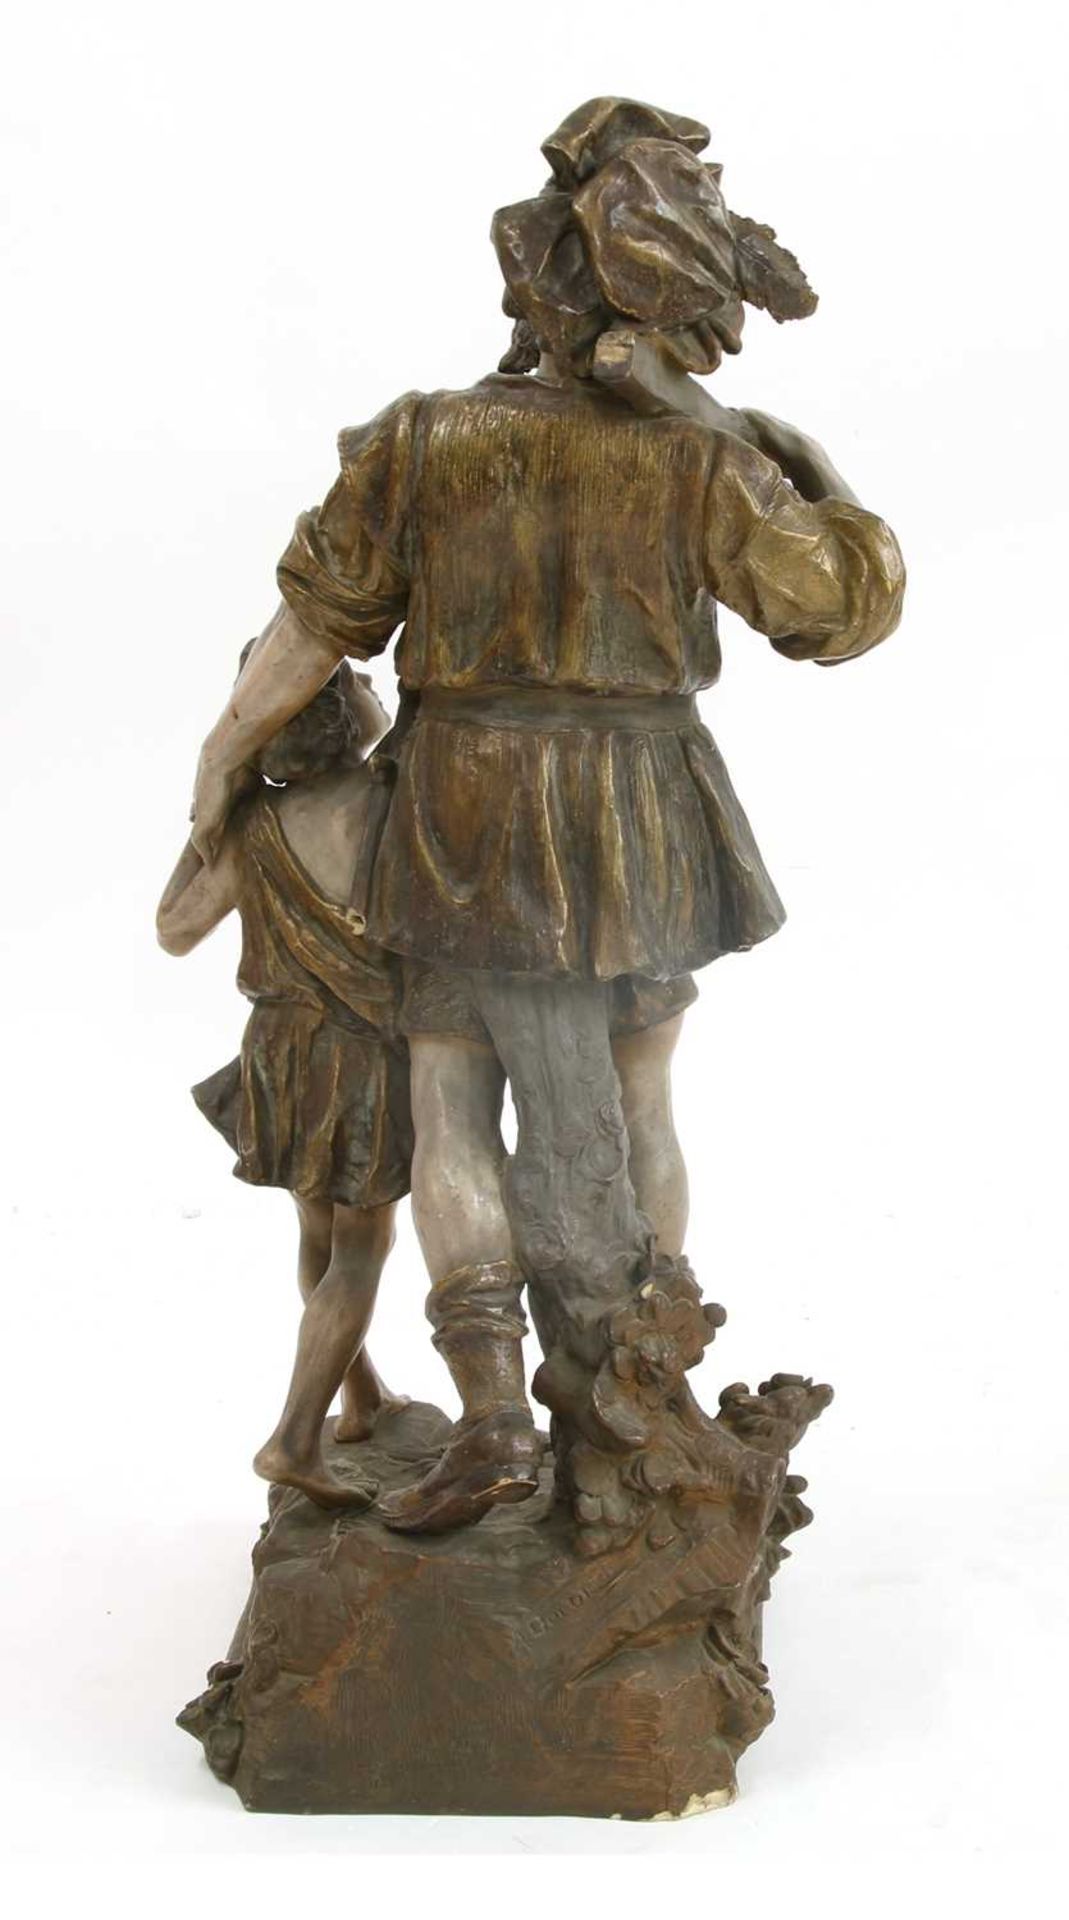 A large terracotta group of William Tell and his son, who is holding up an apple, - Image 3 of 3